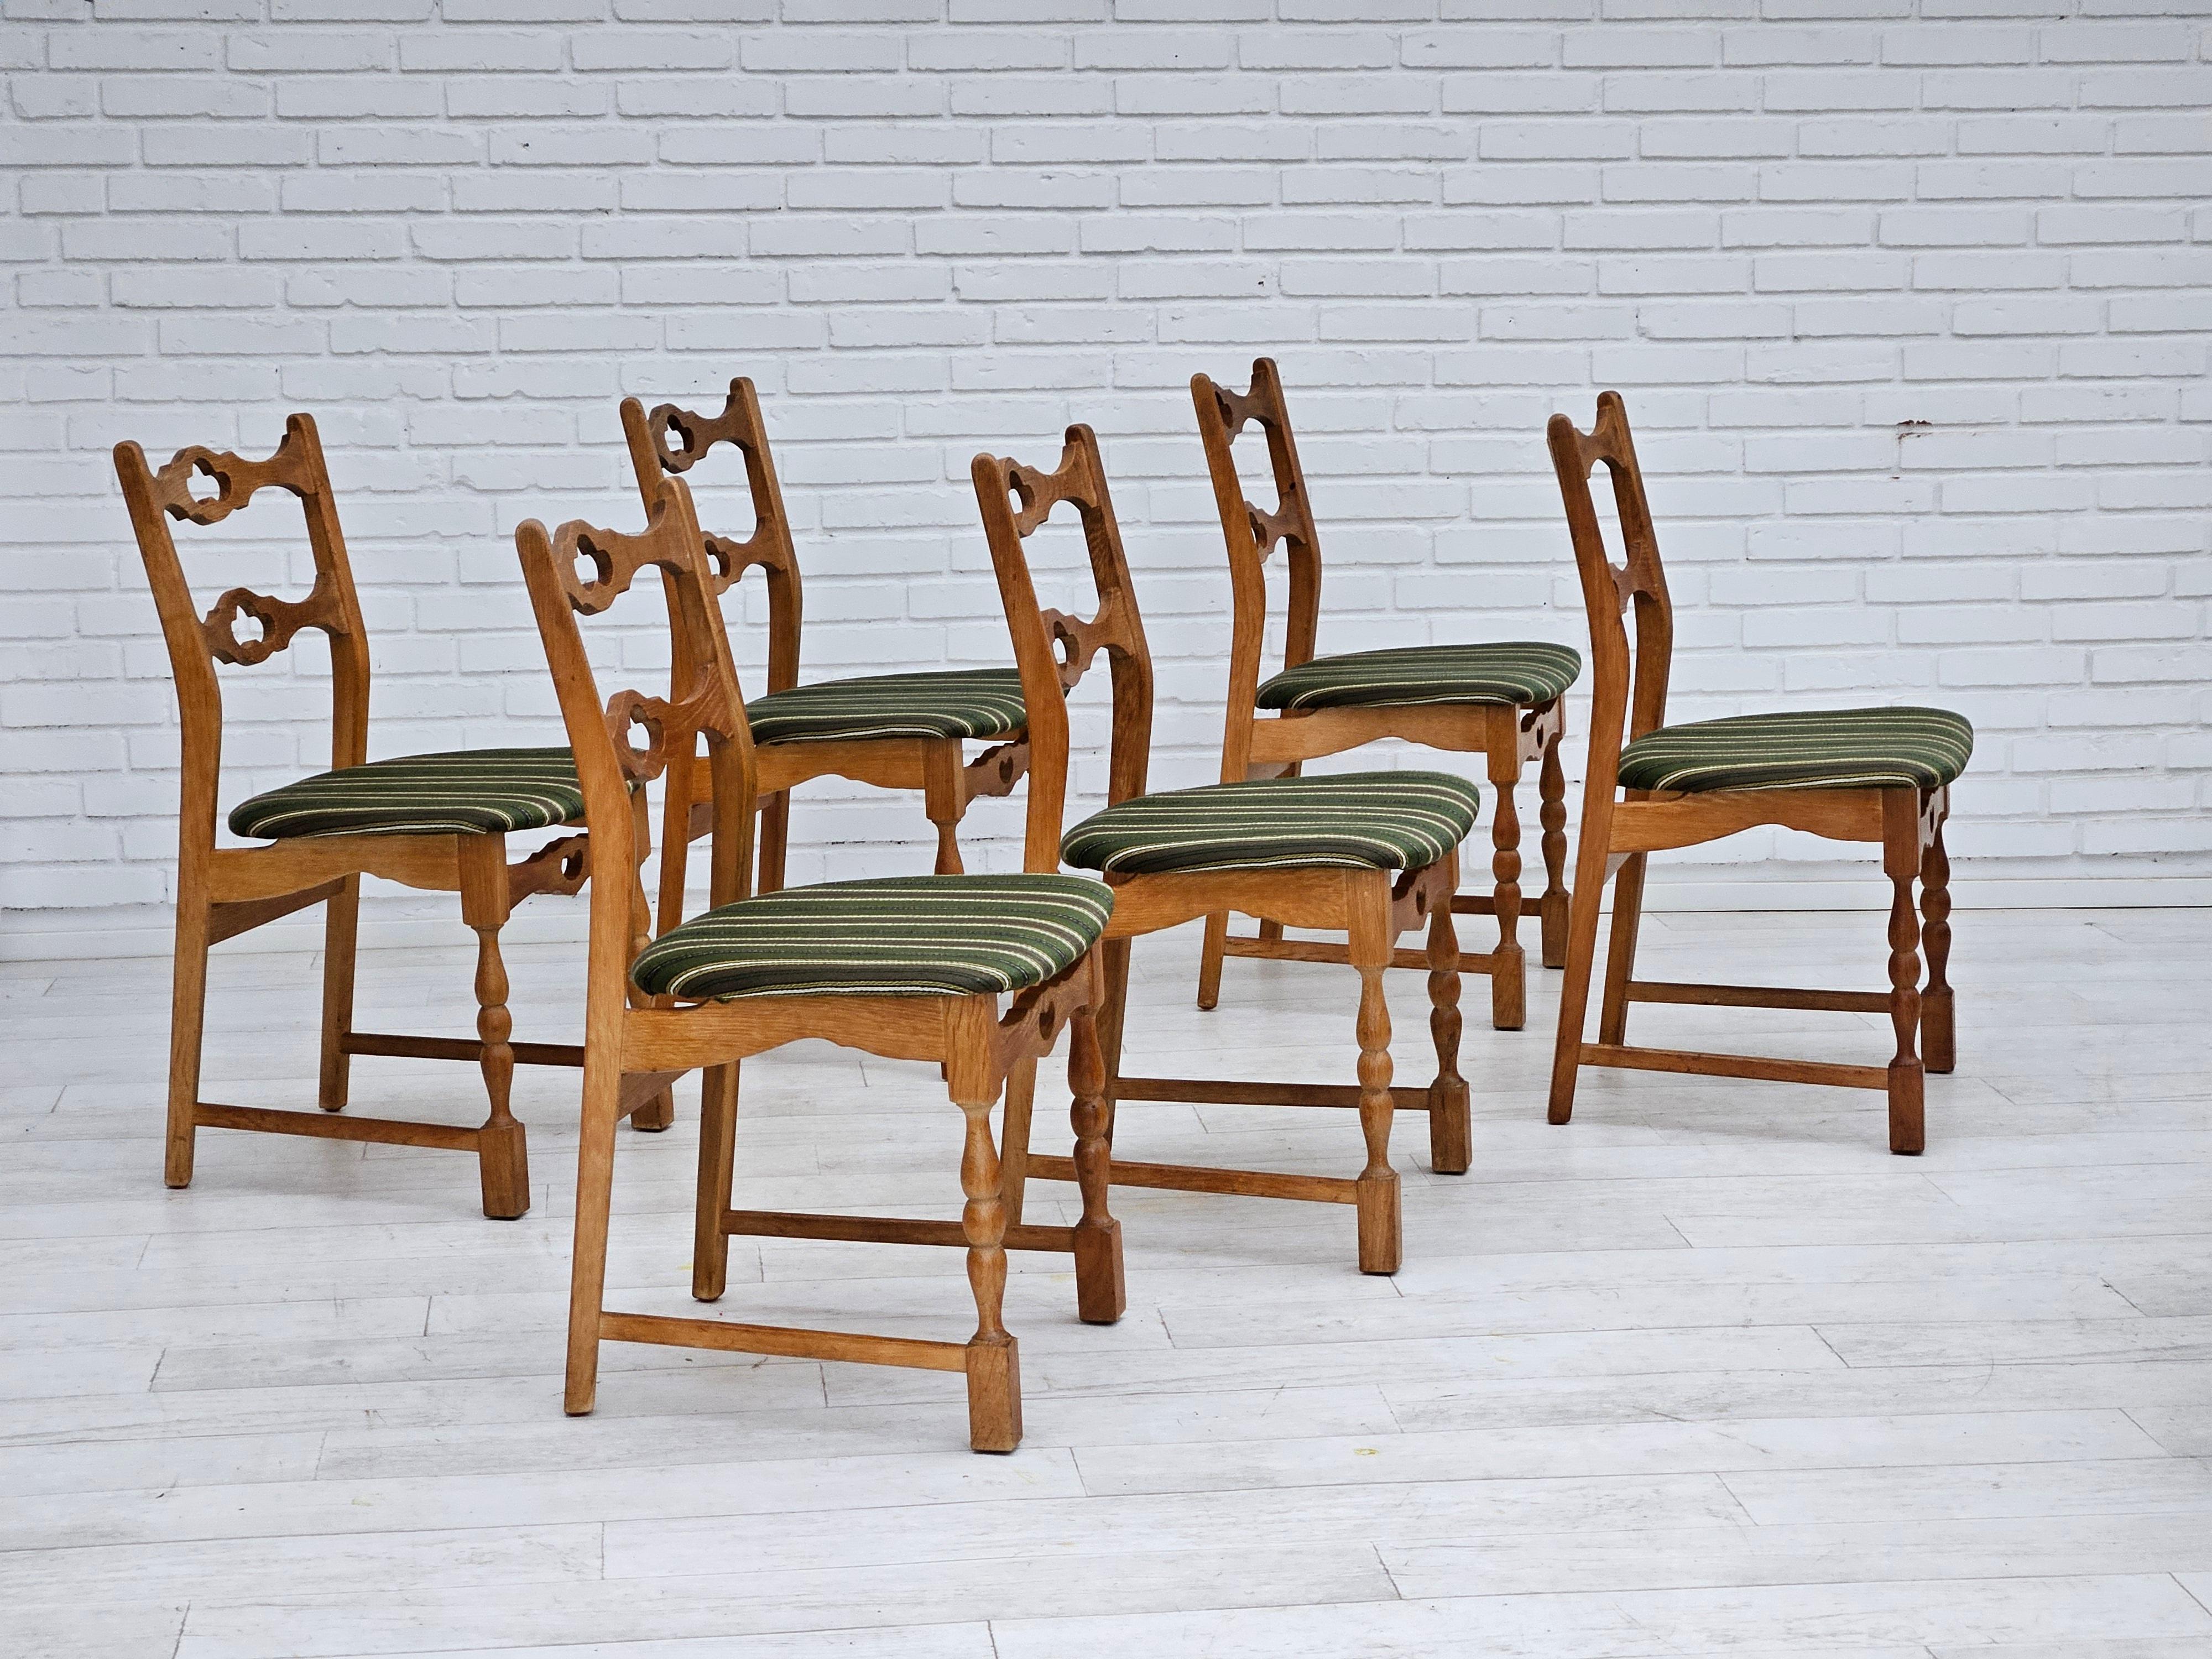 1970s, set of 6 Danish dining chairs in original very good condition: no smells and no stains. Oak wood, furniture wool fabric, removable seats. Manufactured by Danish furniture manufacturer in about 1975.